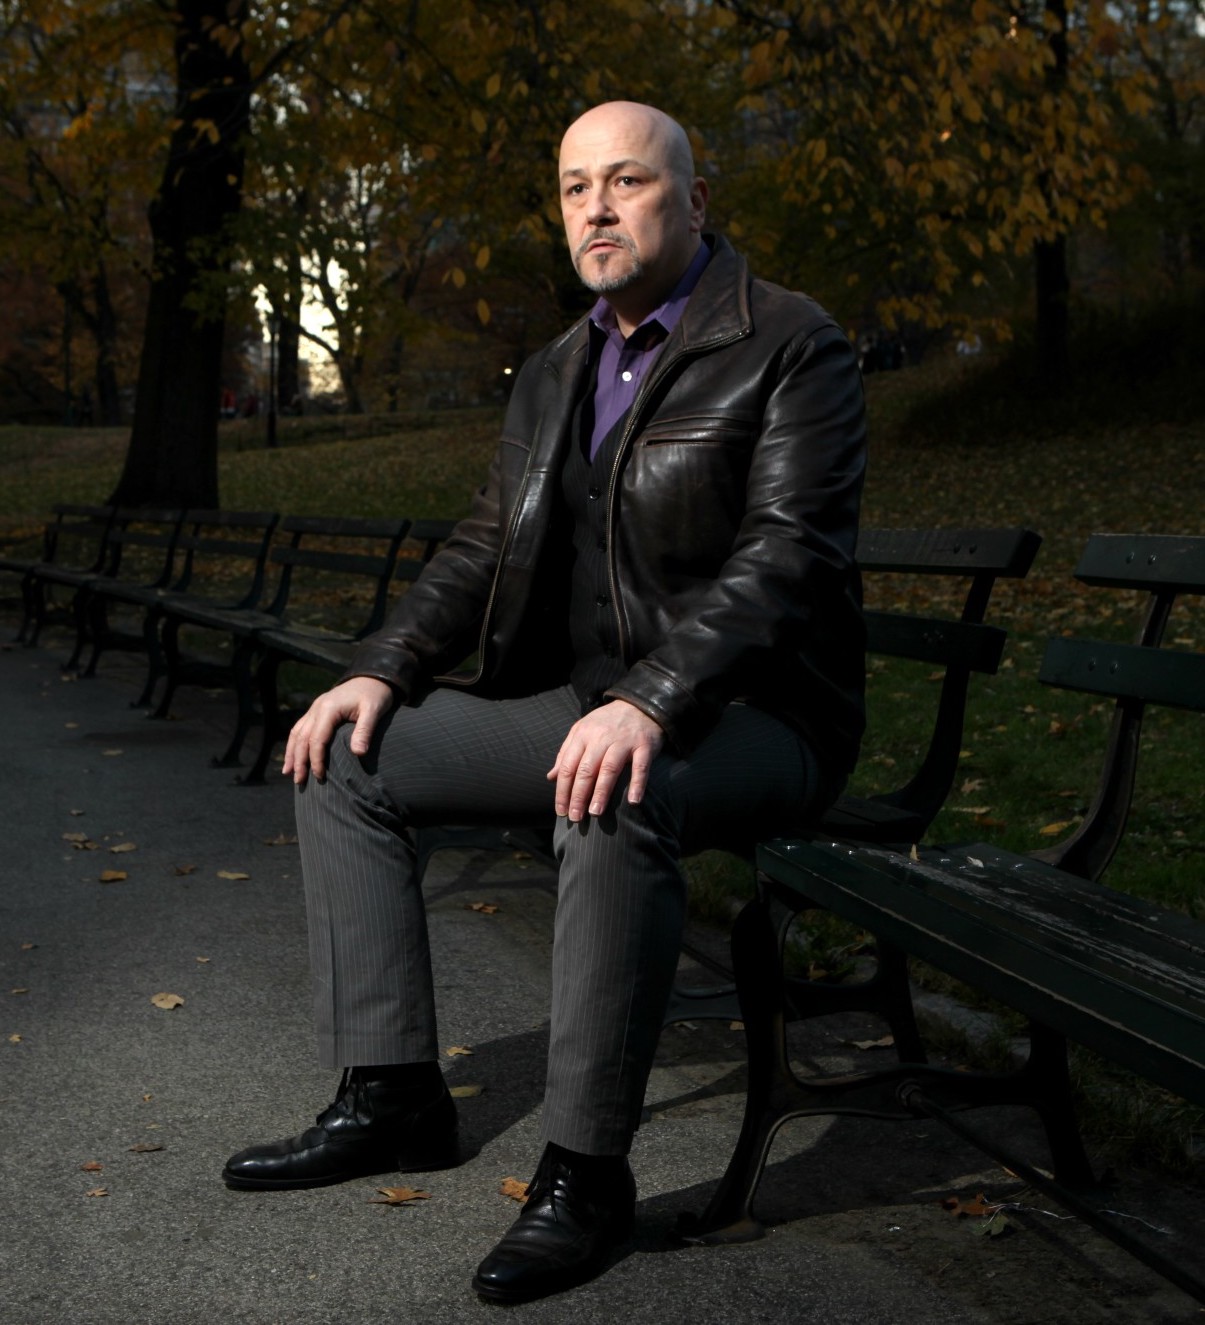 Philip Paul Kelly in Central Park, New York - 2017